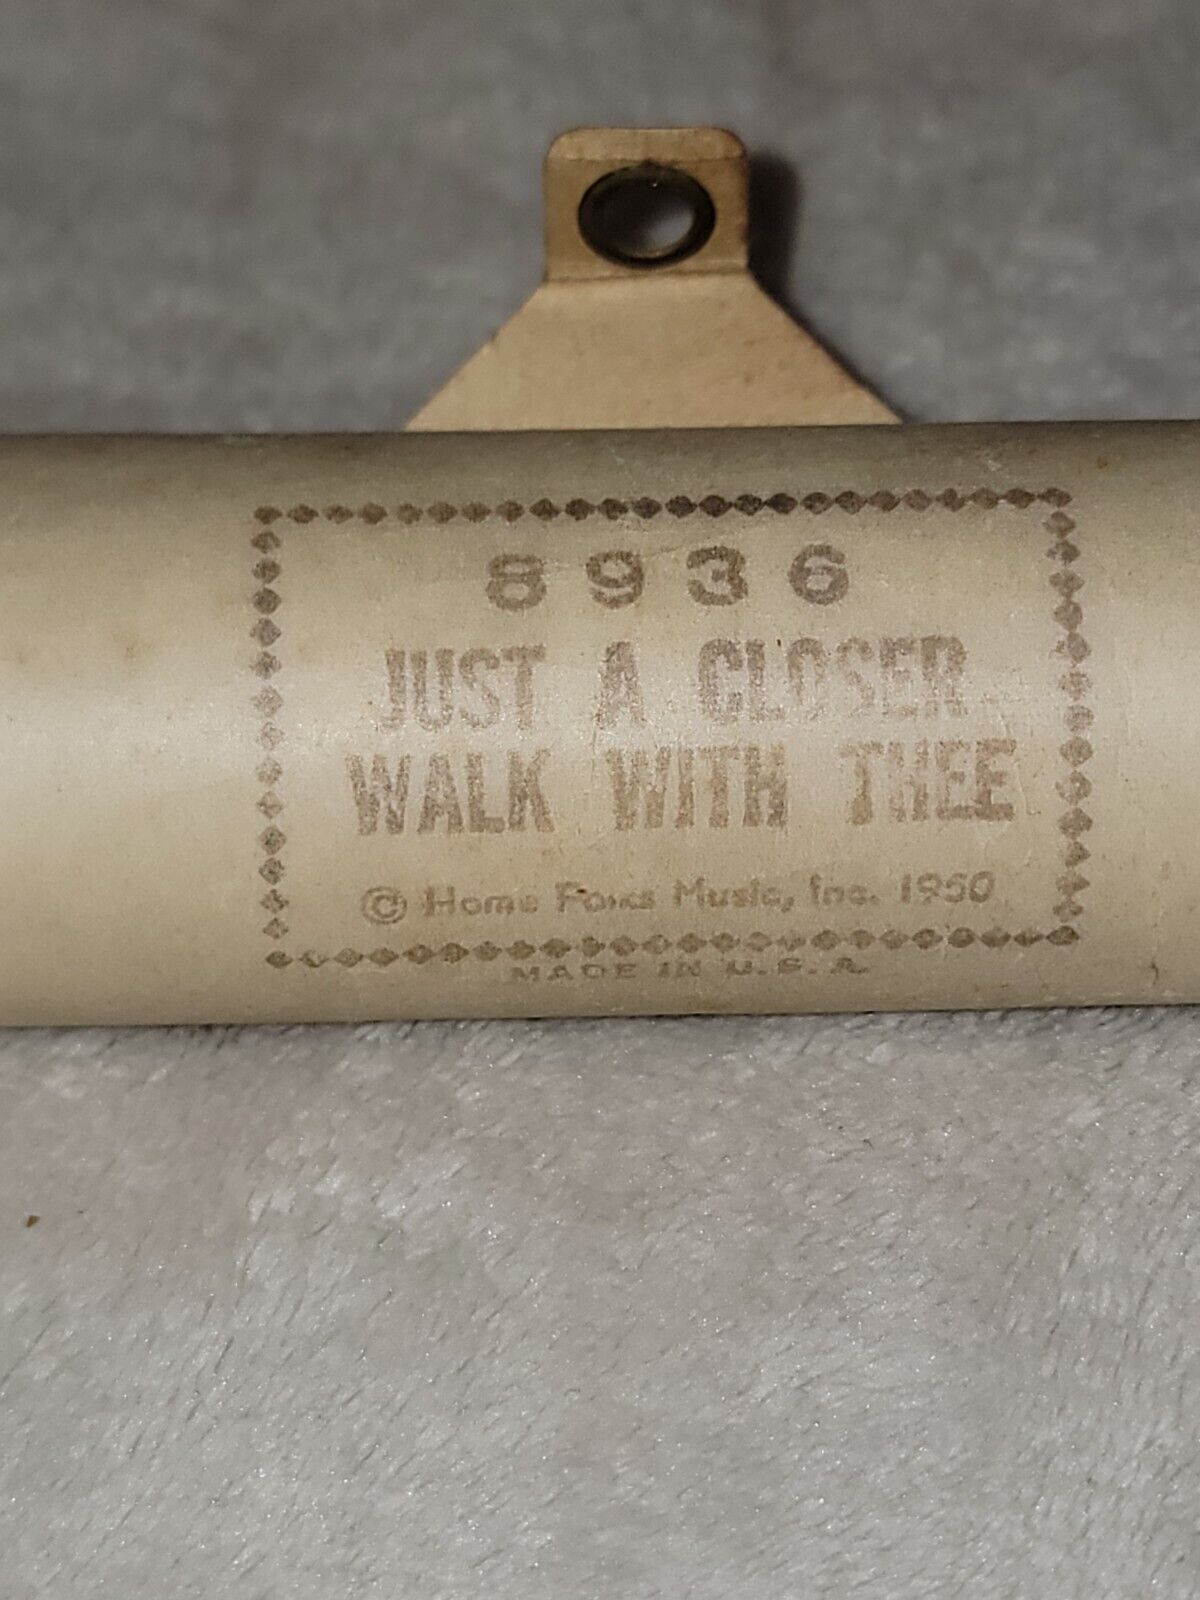 QRS PLAYER PIANO WORD ROLL  8936 JUST A CLOSER WALK WITH THEE WALTER REDDING